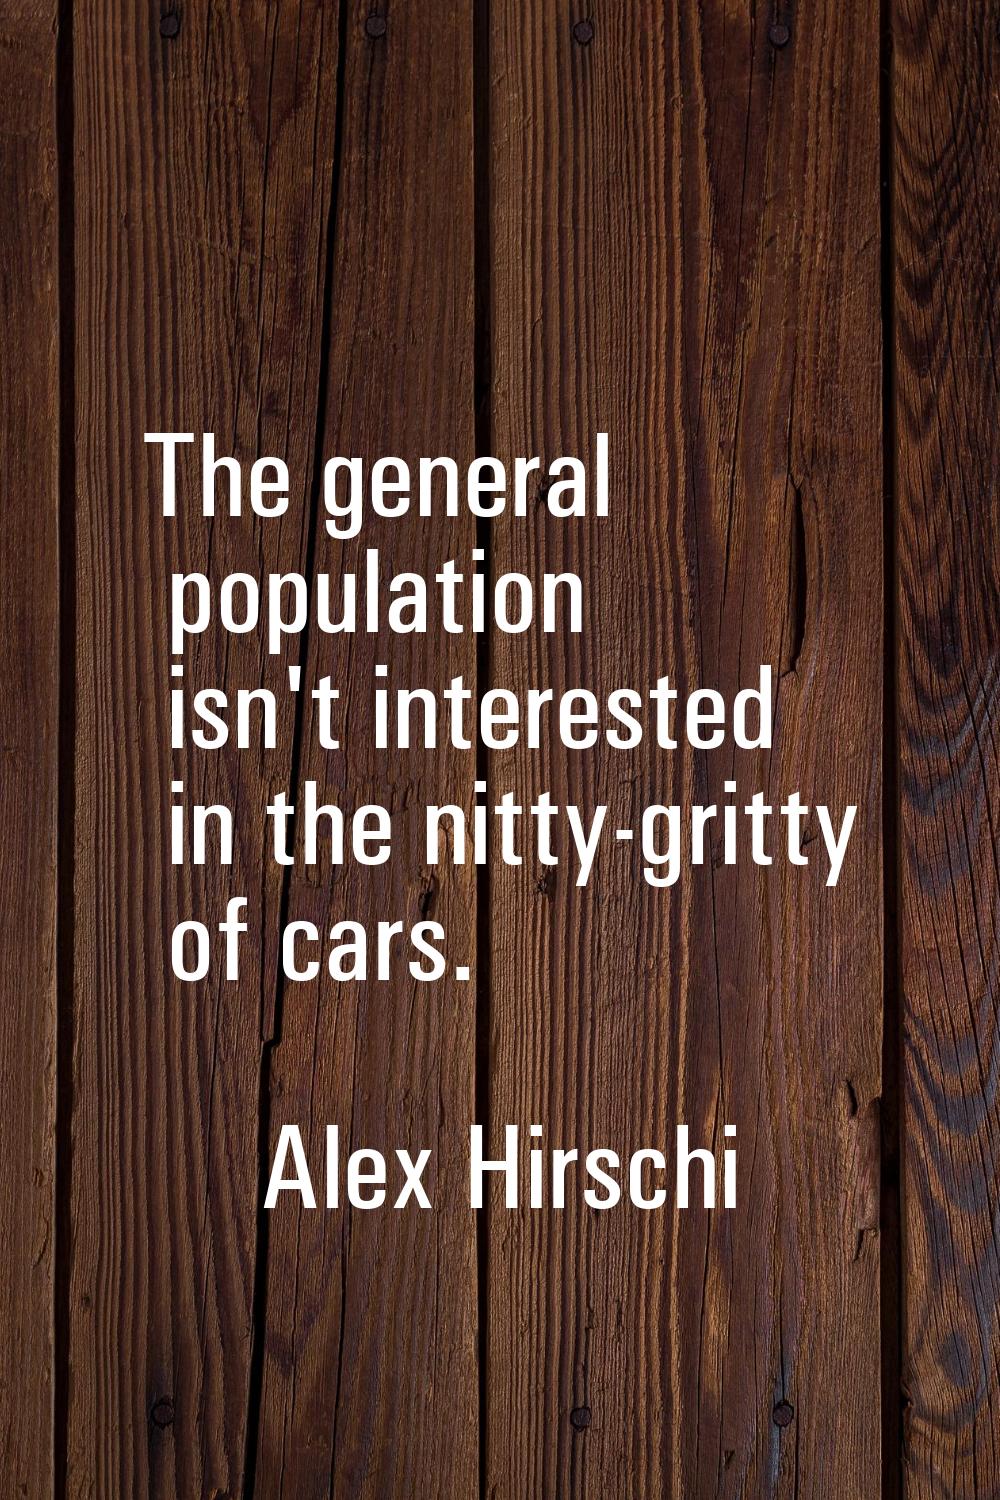 The general population isn't interested in the nitty-gritty of cars.